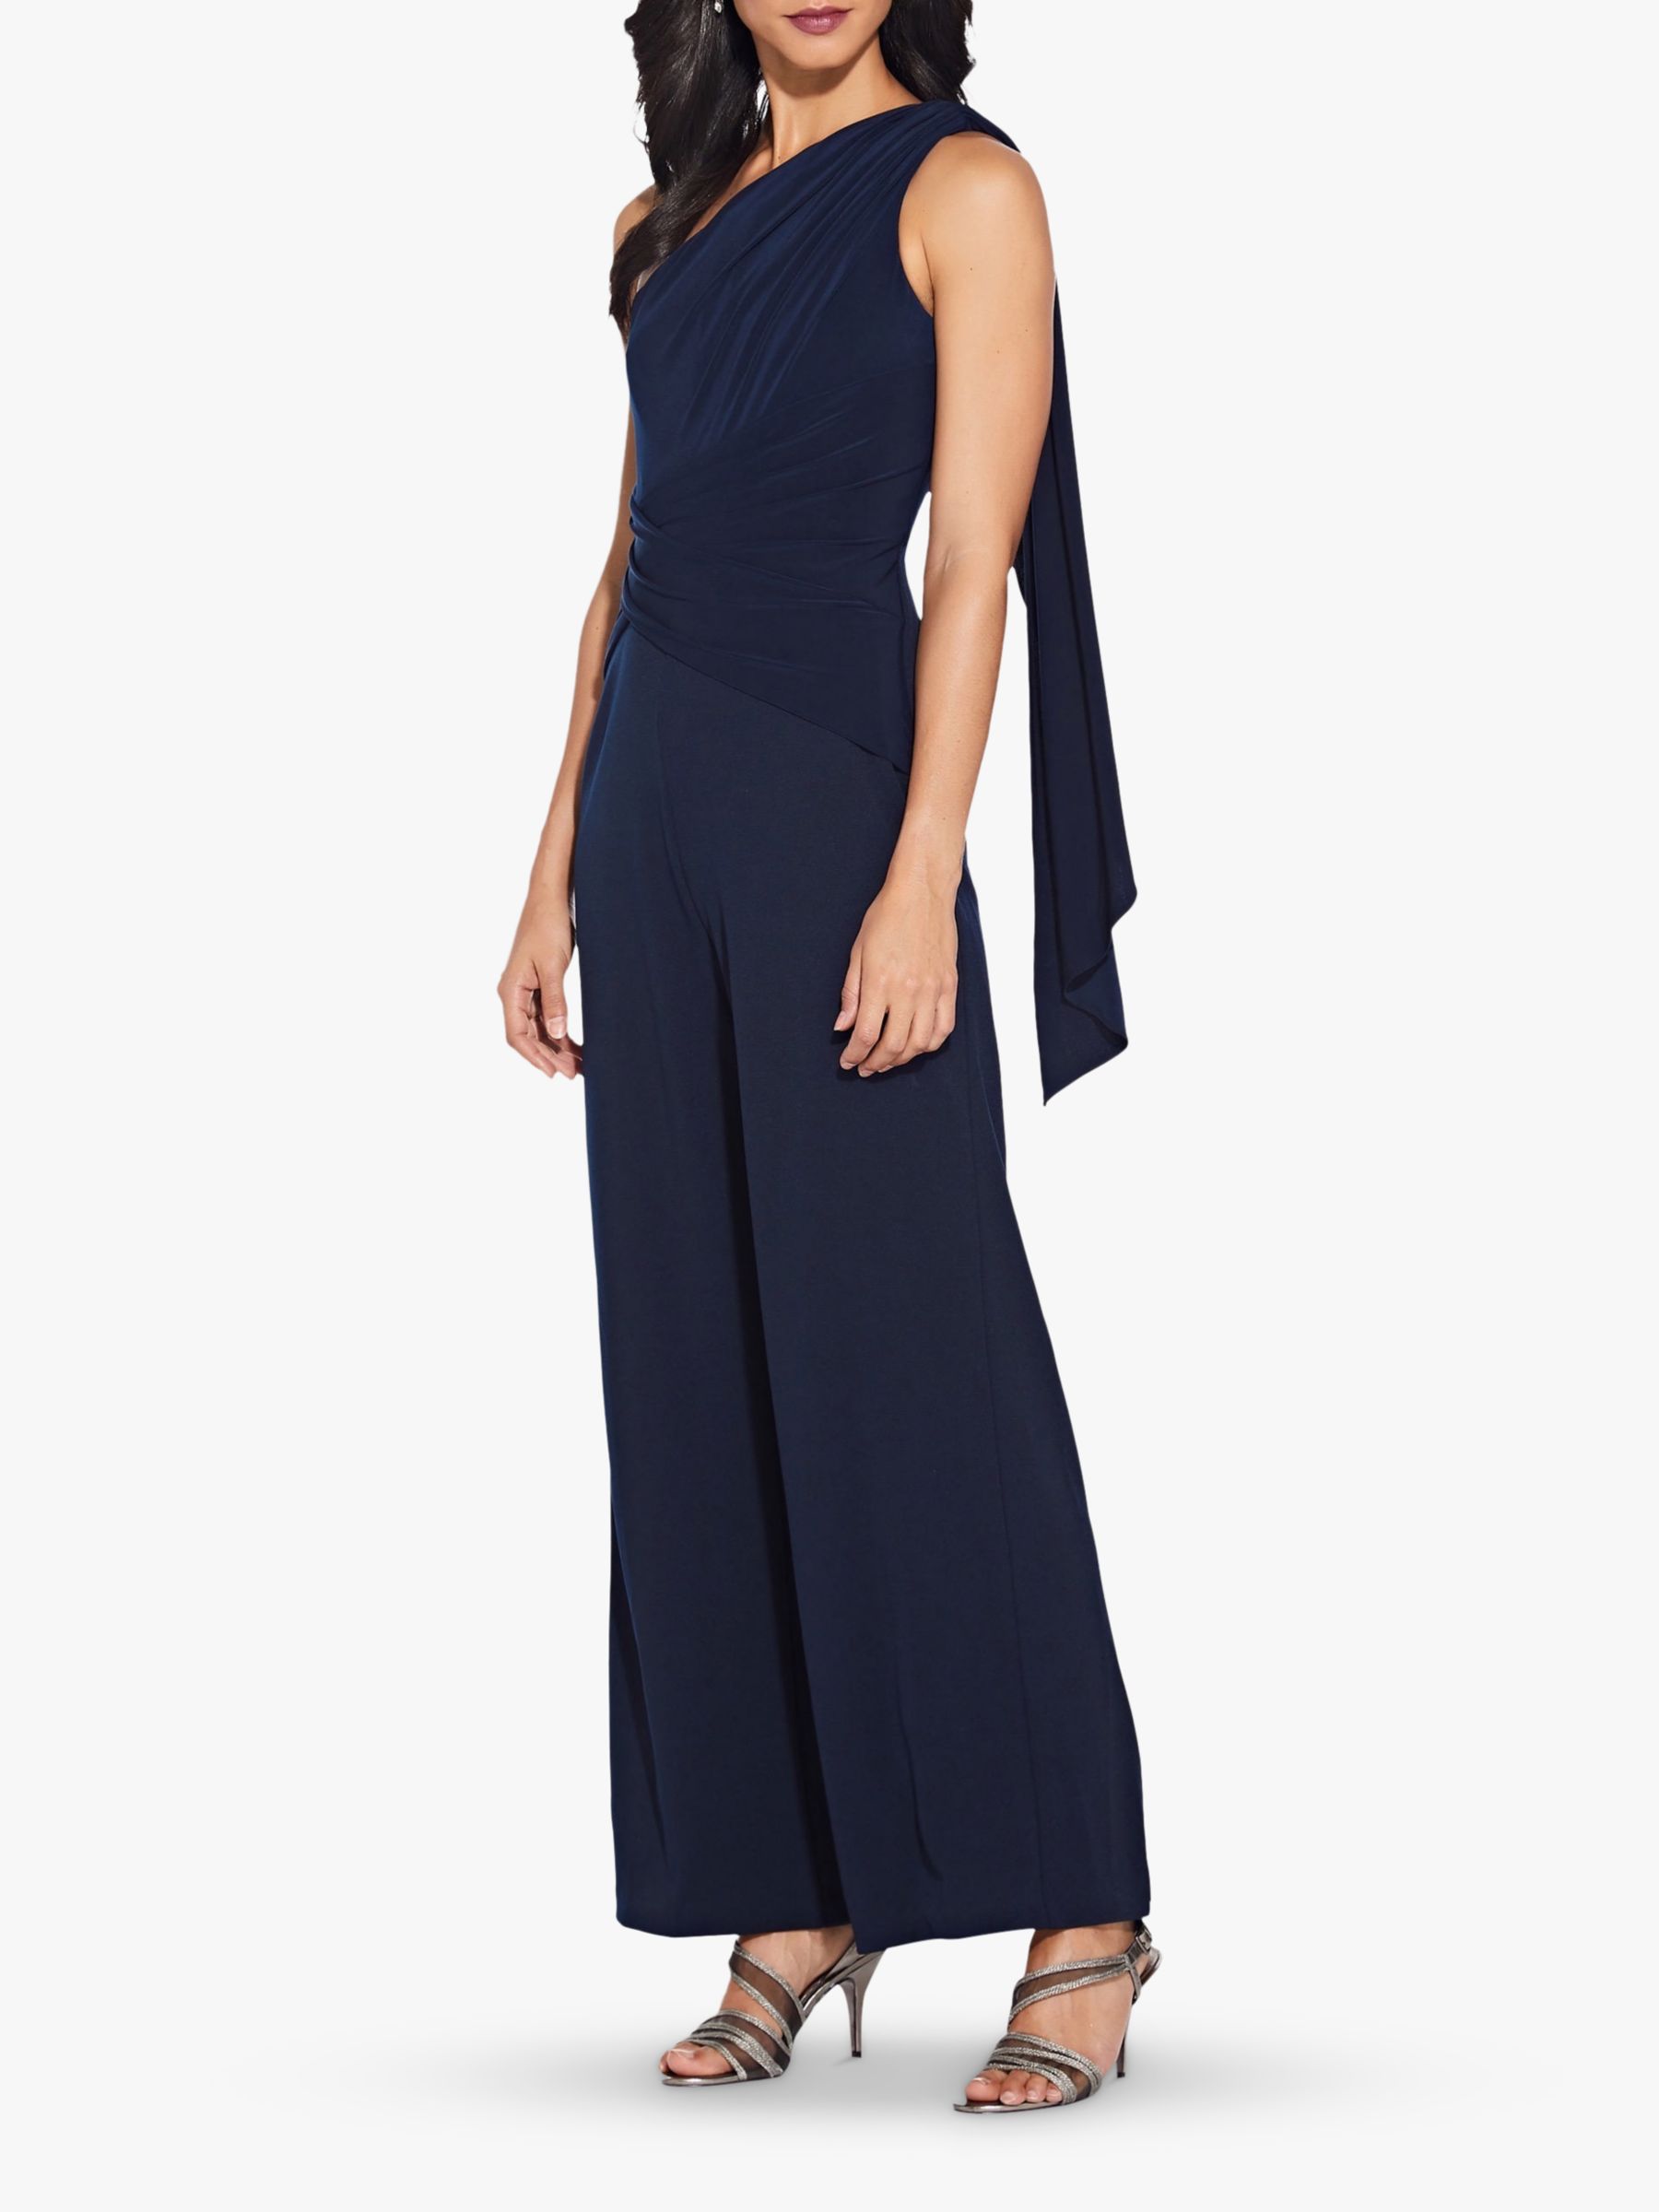 Adrianna Papell One Shoulder Jumpsuit, Midnight at John Lewis & Partners